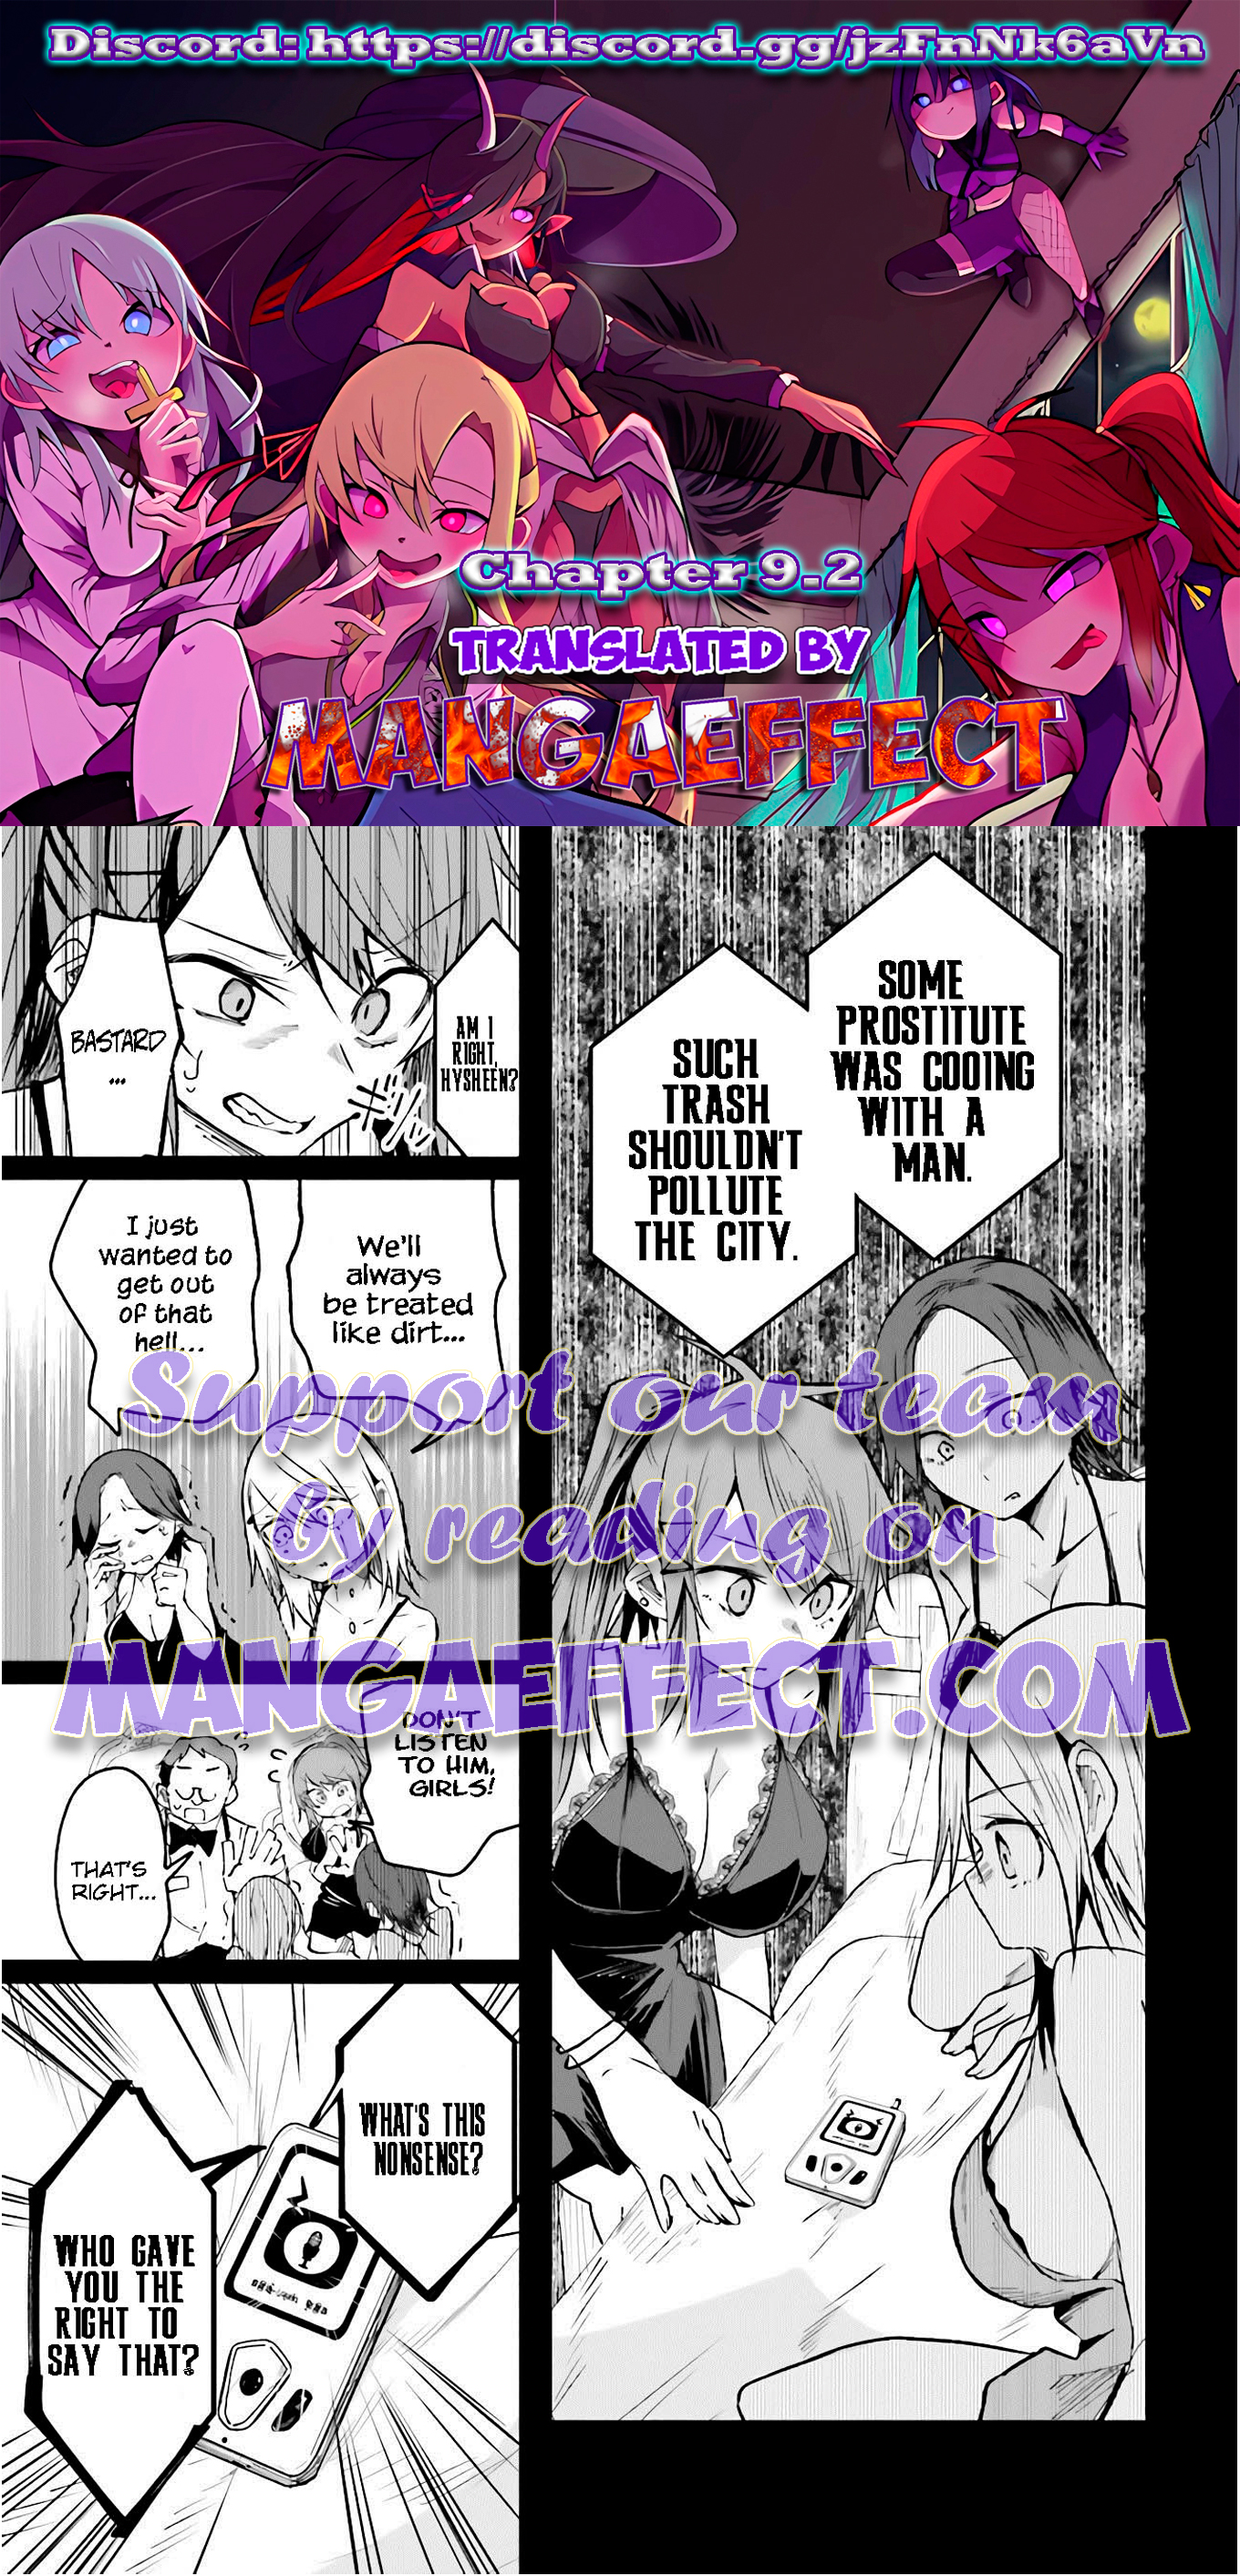 The Case In Which Streaming In Another World Led To The Creation Of A Massive Yandere Following - chapter 9.2 - #1